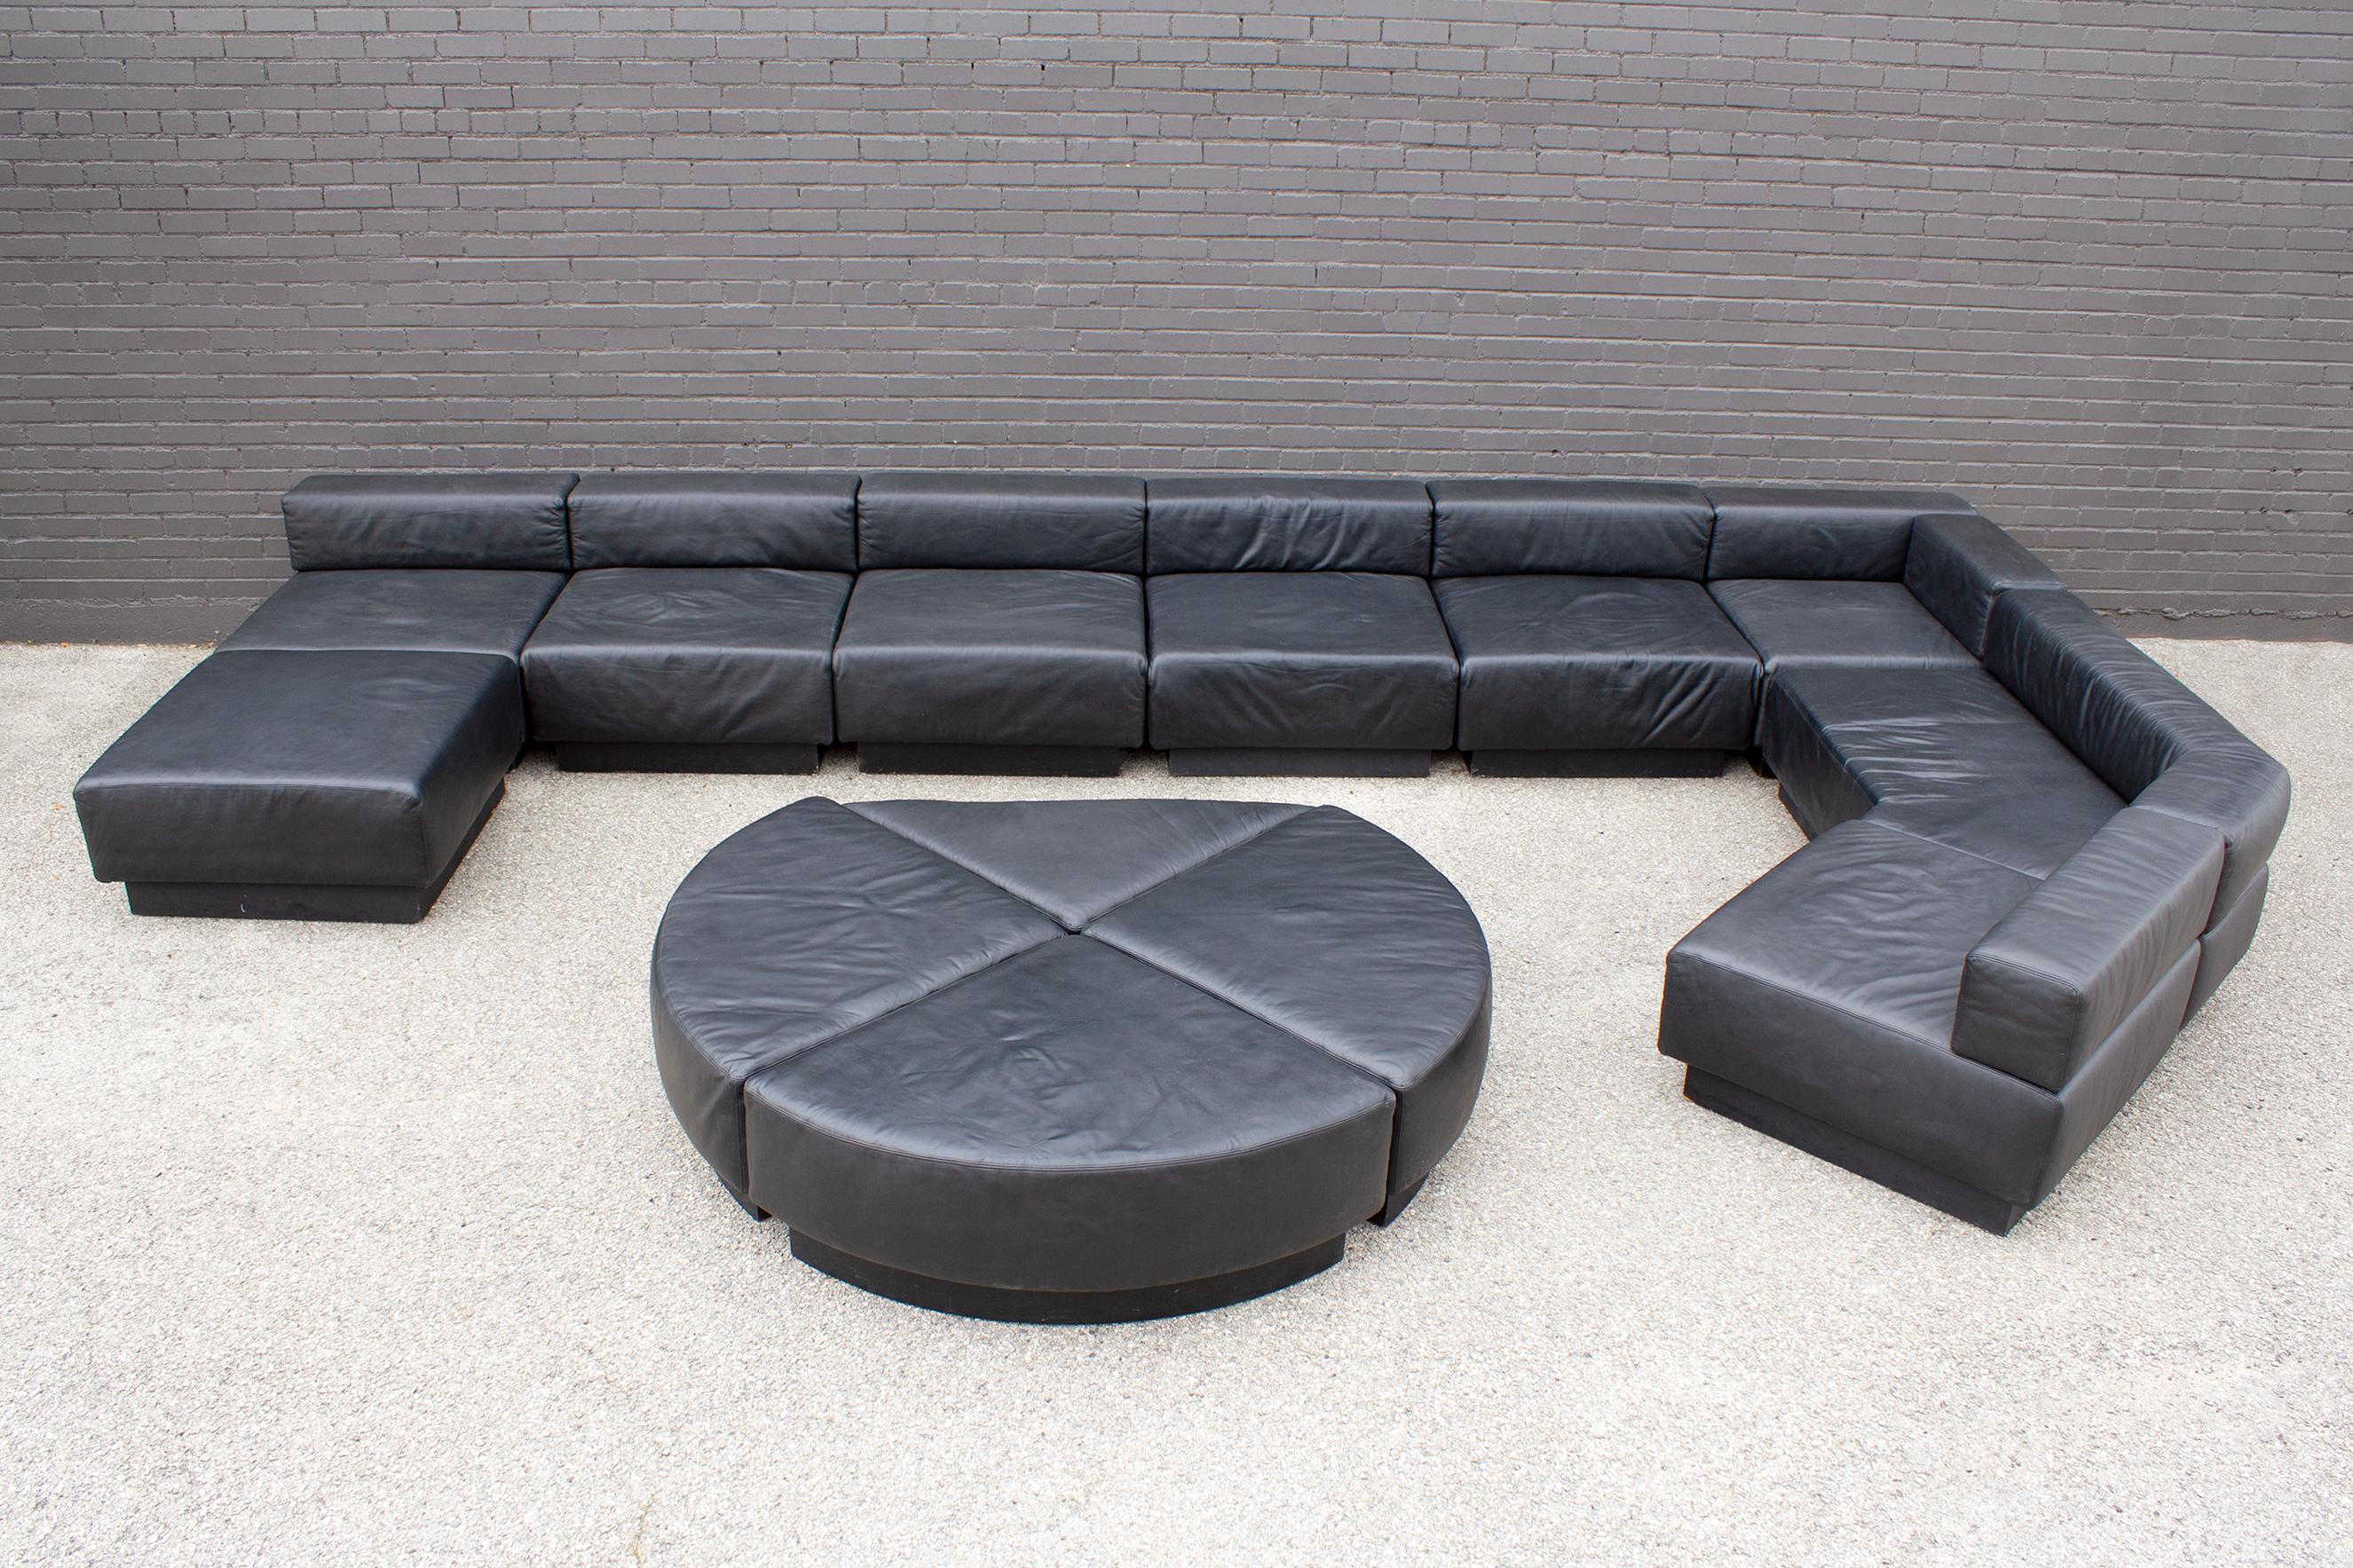 Black Leather Leather 'Cubo' Sectional Sofa by Harvey Probber, 1970s For Sale 3